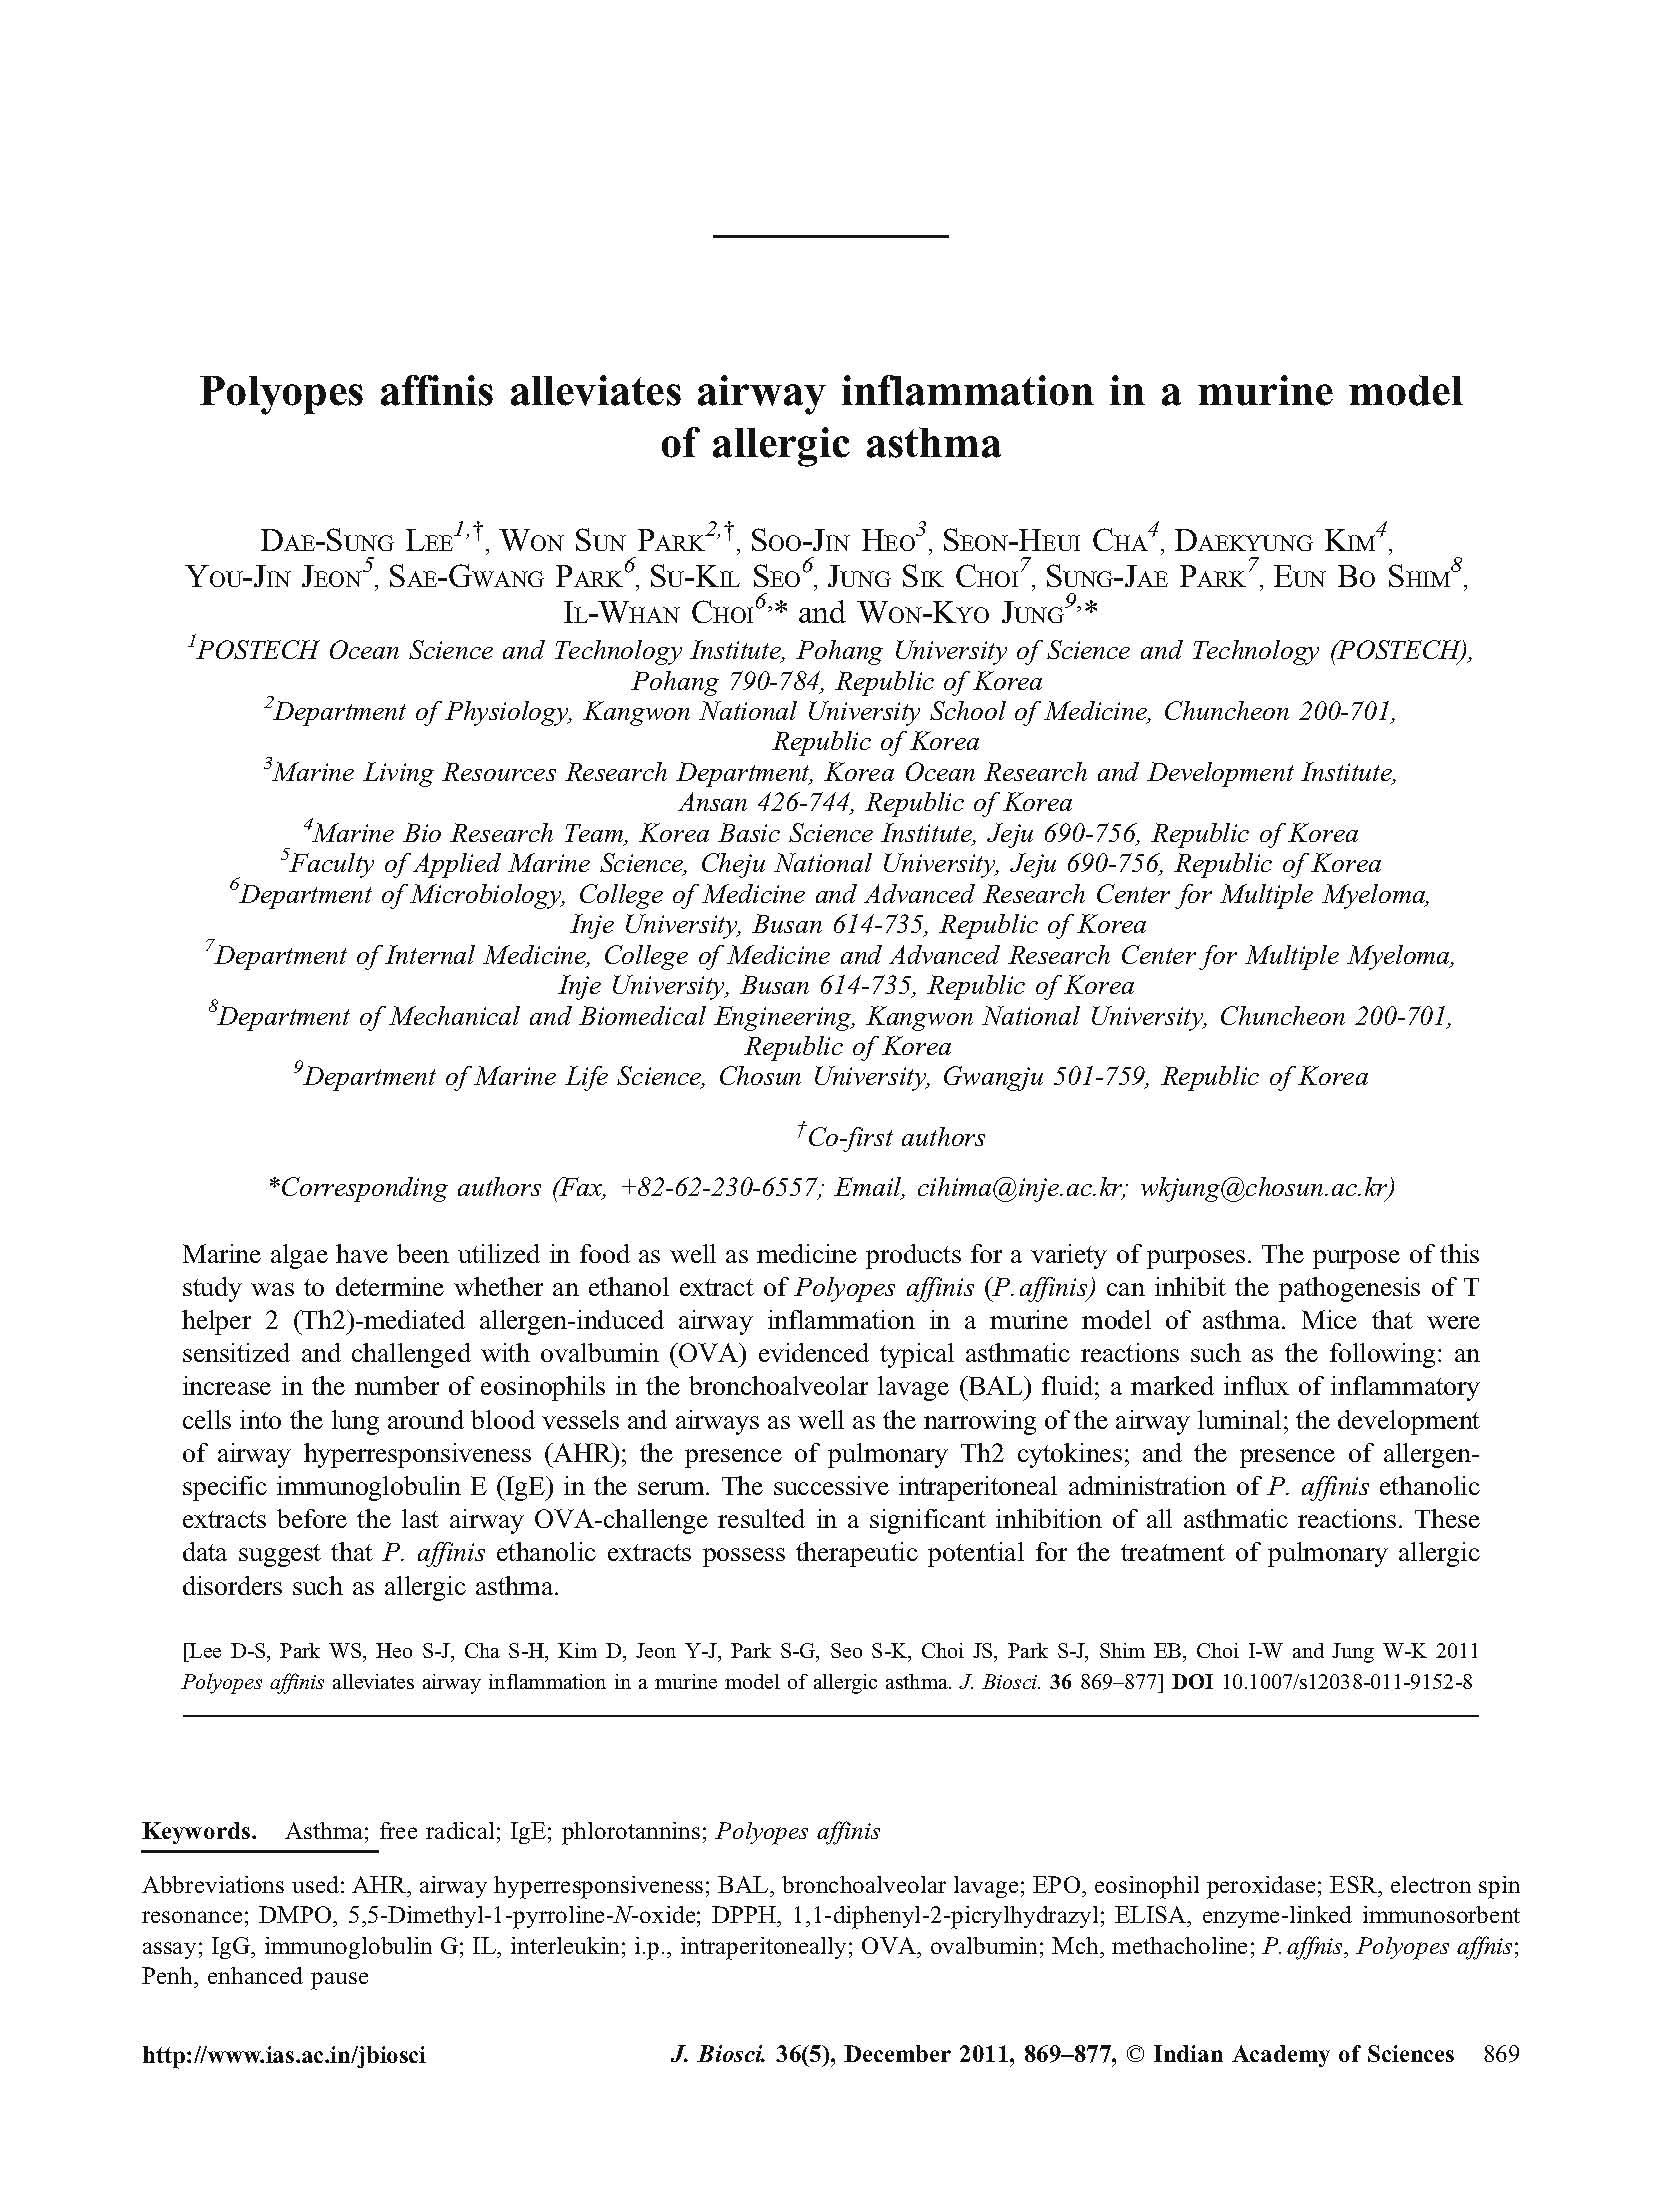 Polyopes affinis alleviates airway inflammation in a murine model of allergic asthma.jpg 1654X2205